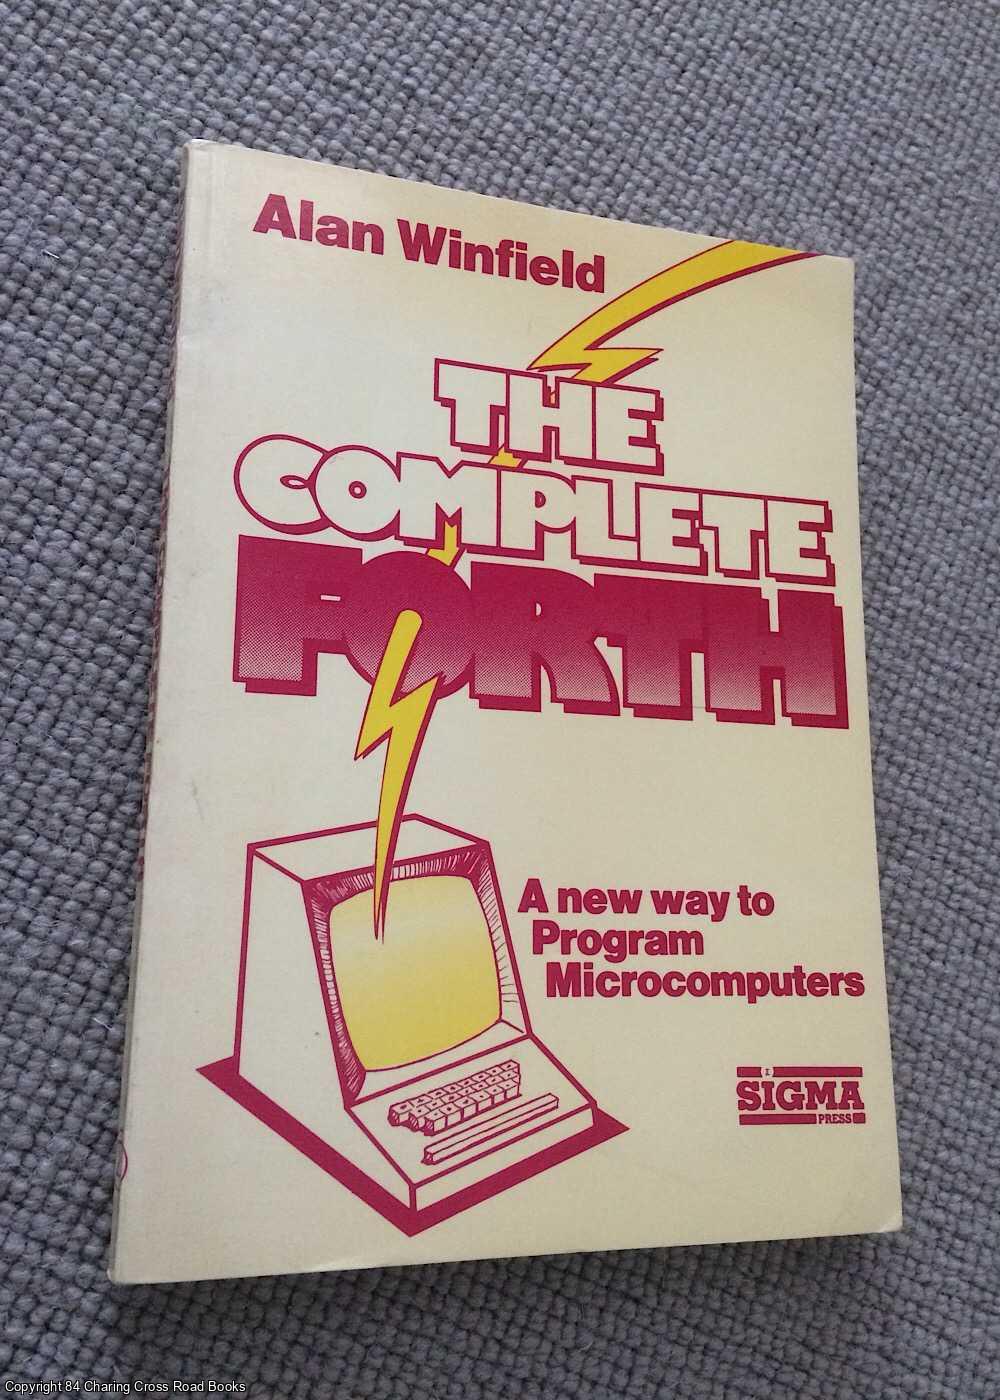 Winfield, Alan - The Complete FORTH